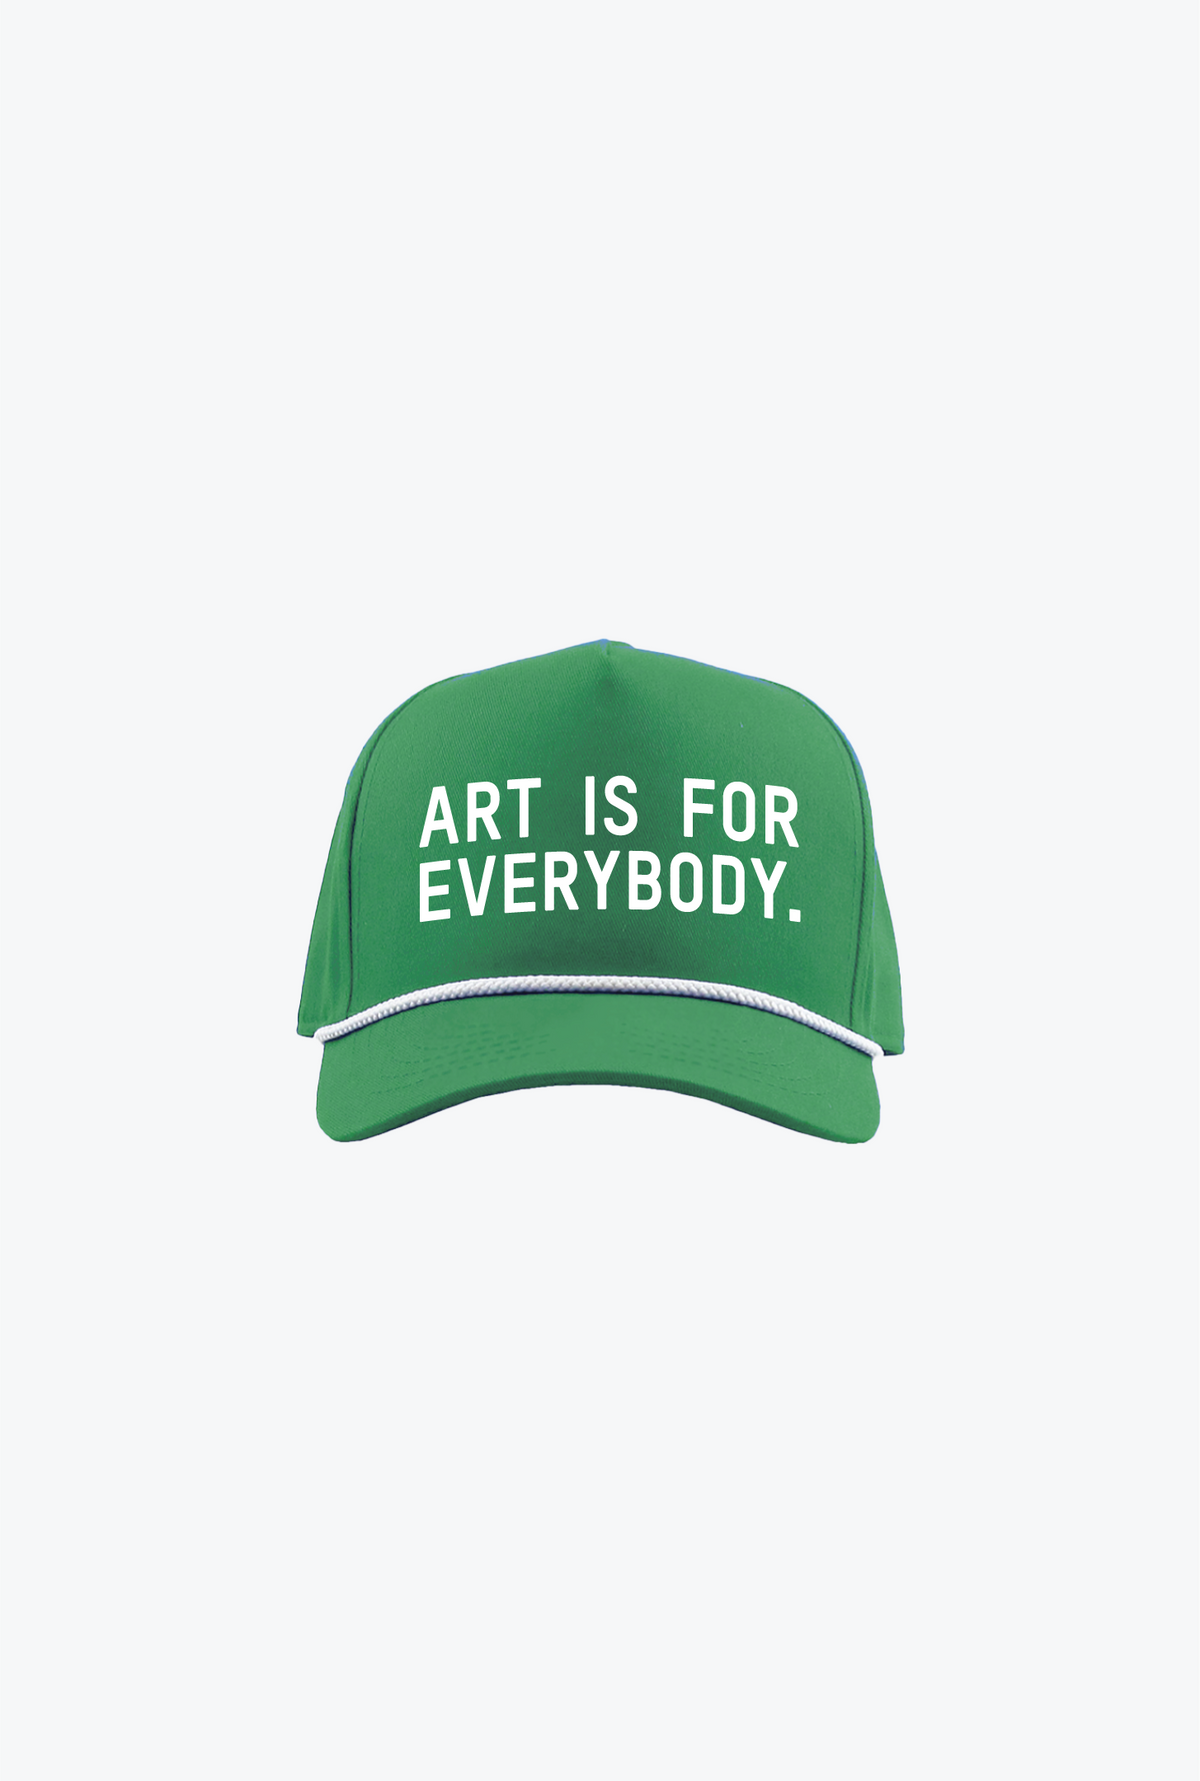 P/C x Keith Haring Art if r A-Frame Cap - Kelly Green